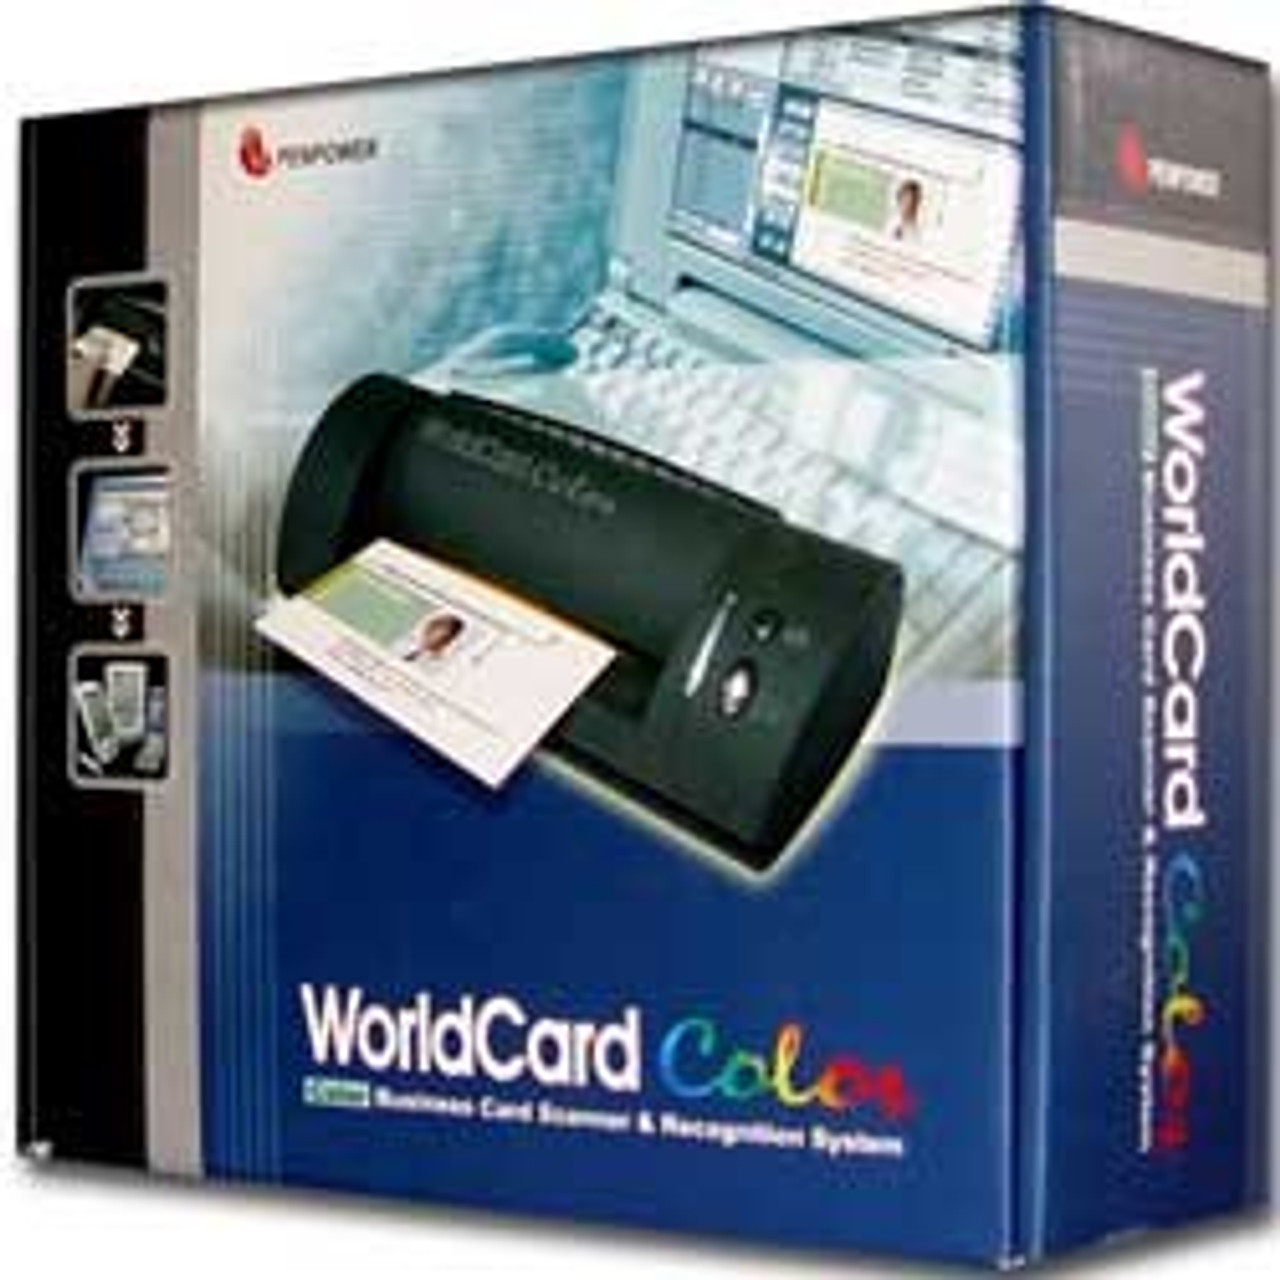 PenPower WorldCard Office with a Card Color Scanner